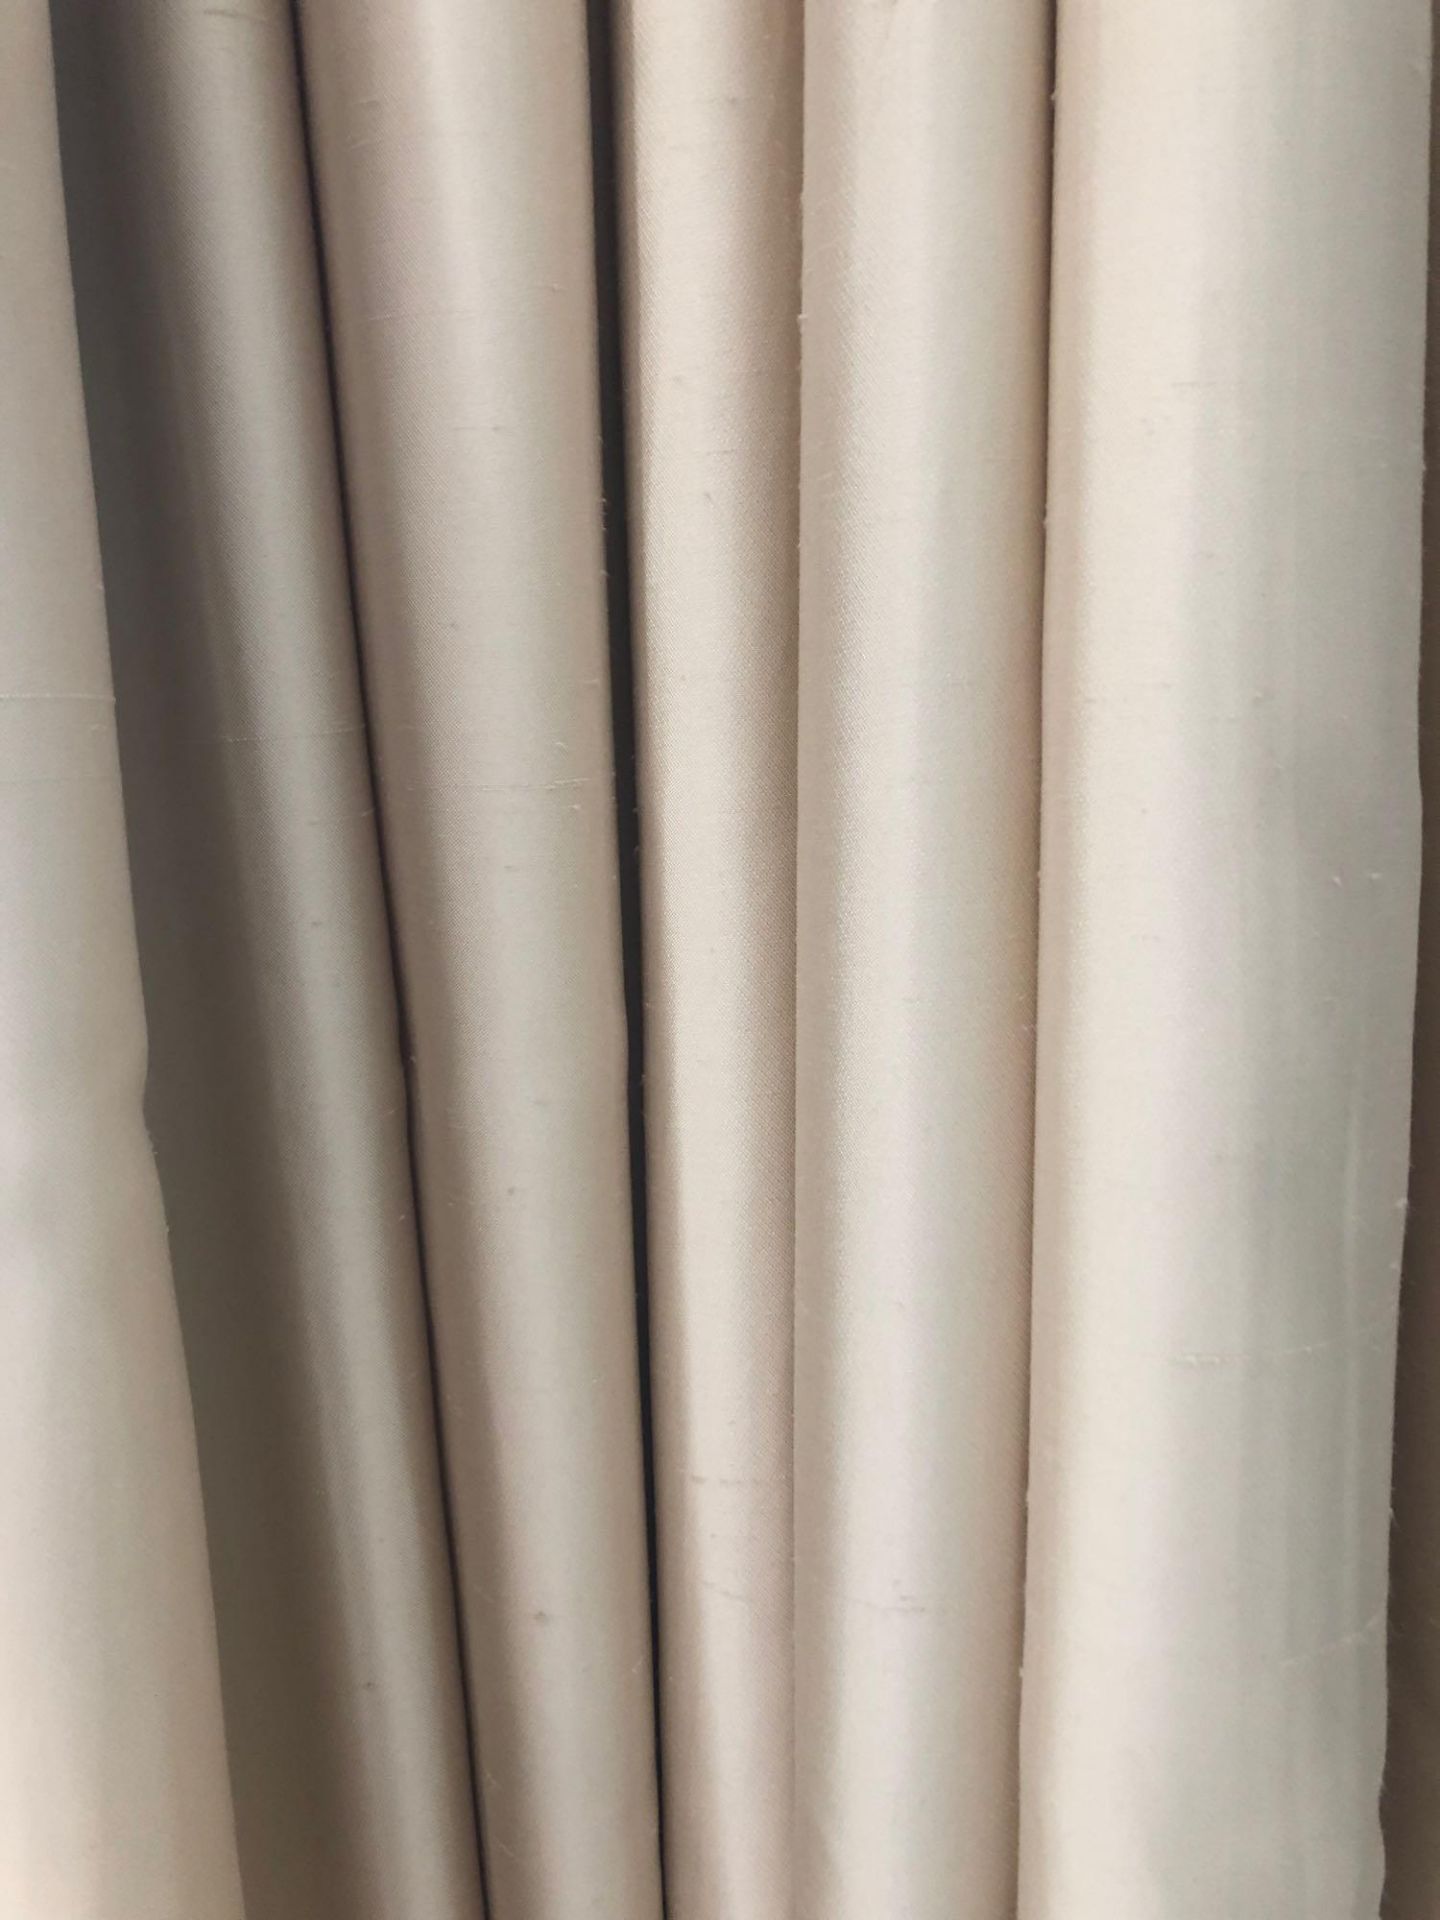 A Pair Of Luxury Silk Drapes With Pelmet In Cream And Brown Silk Complete With Tassels Rope 250 x - Bild 4 aus 4